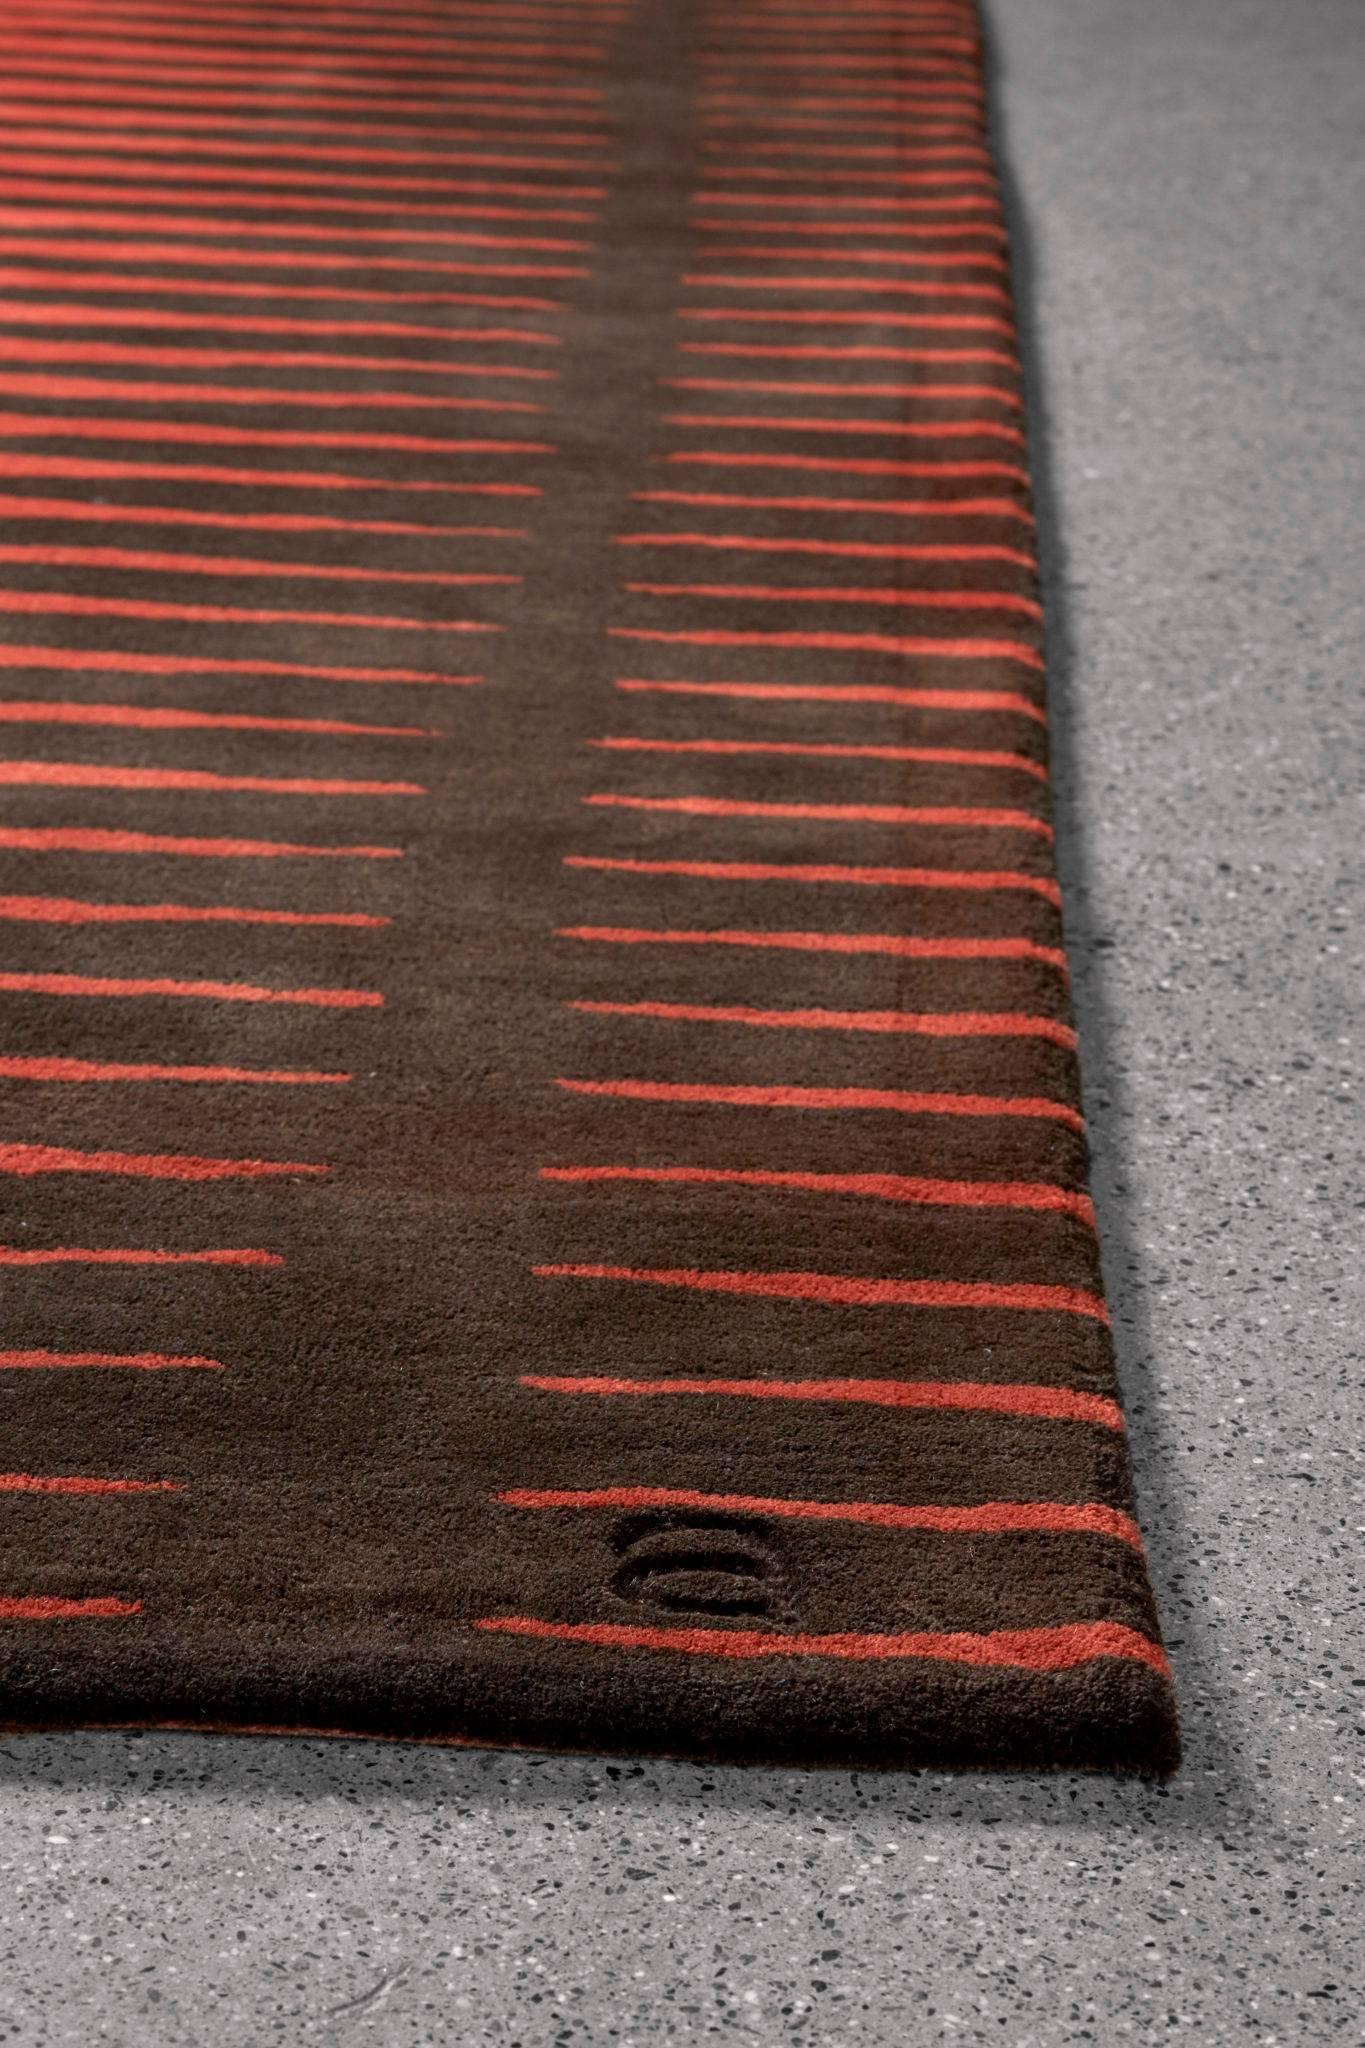 The Spock / Mars area rug in rich red and brown, features a futuristic spin on a Classic geometric pattern, bringing to life vibrant energy fields in planetary colors. This design is a tribute to Mr. Spock of Star Trek, for his wisdom, integrity and